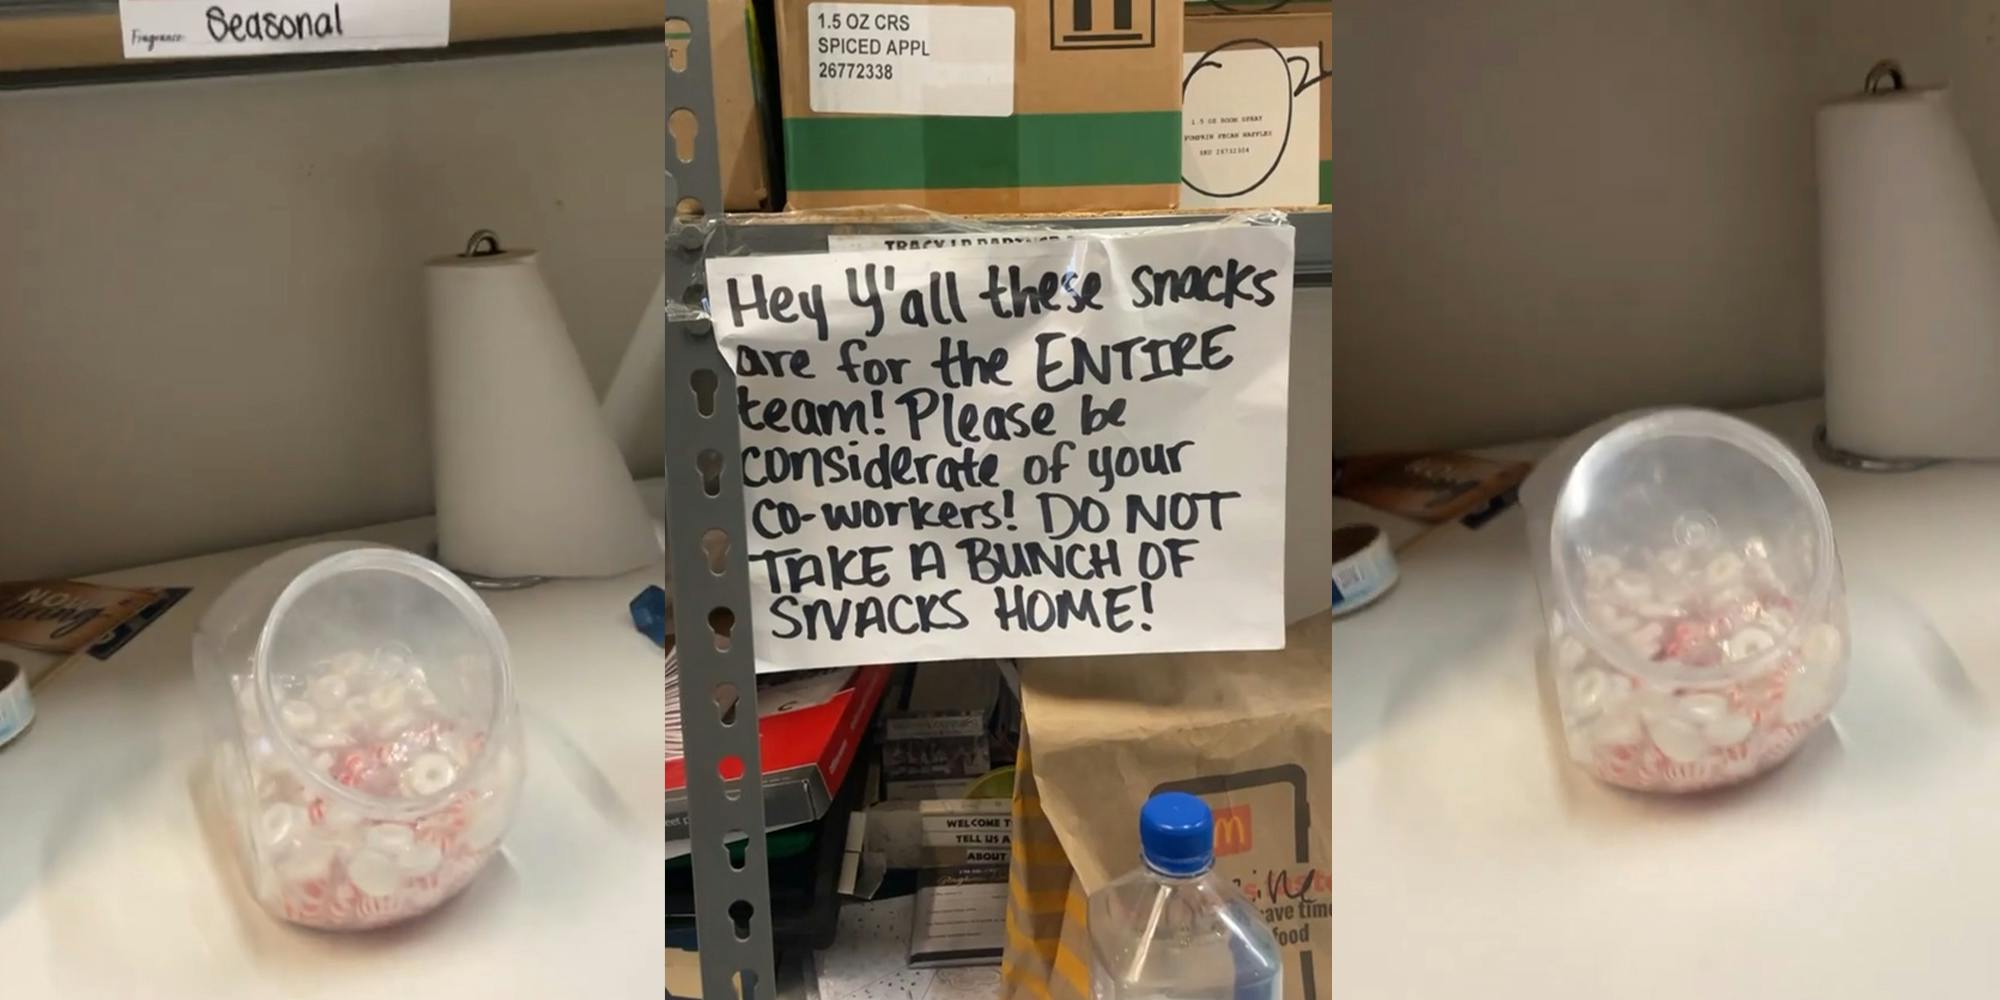 Workplace leaves LifeSaver mints as ‘snacks’ for workers, asks workers to ration them